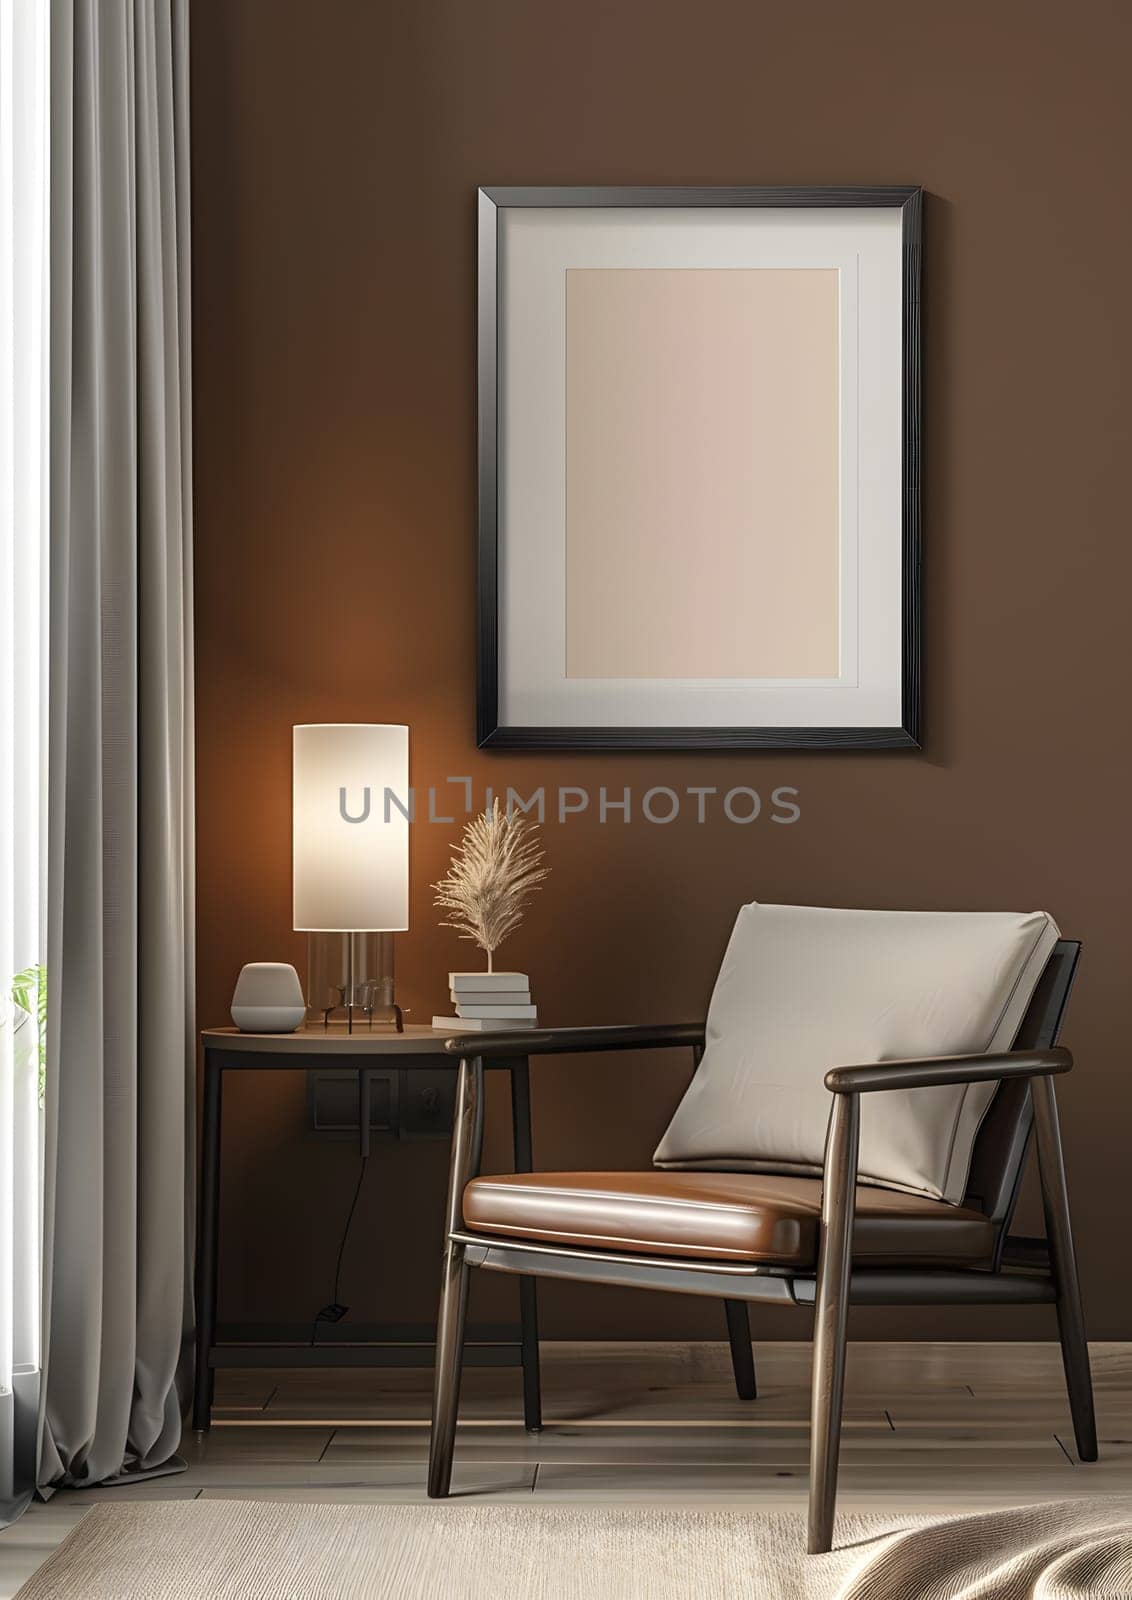 A cozy living room in a building with a comfortable chair, wooden table, stylish lamp, and a beautiful picture on the wall, creating a welcoming atmosphere